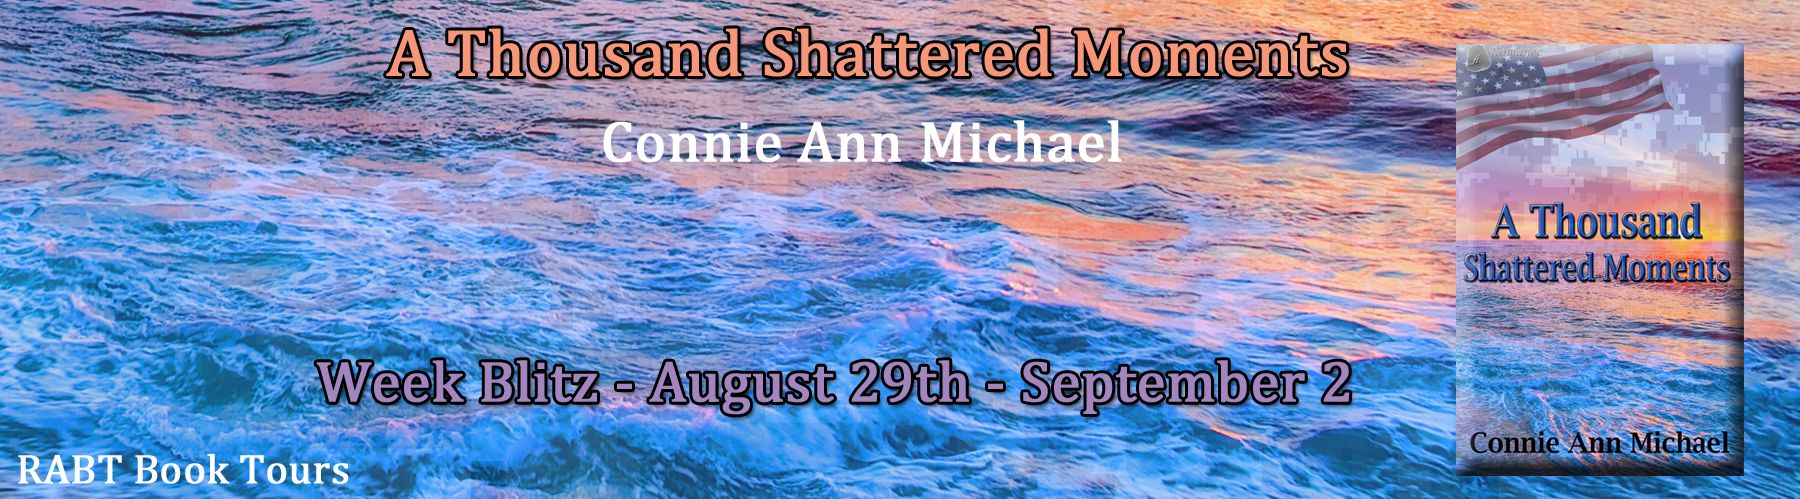 PROMO BLitz: A Thousand Shattered Moments by @connieamichael with an #excerpt